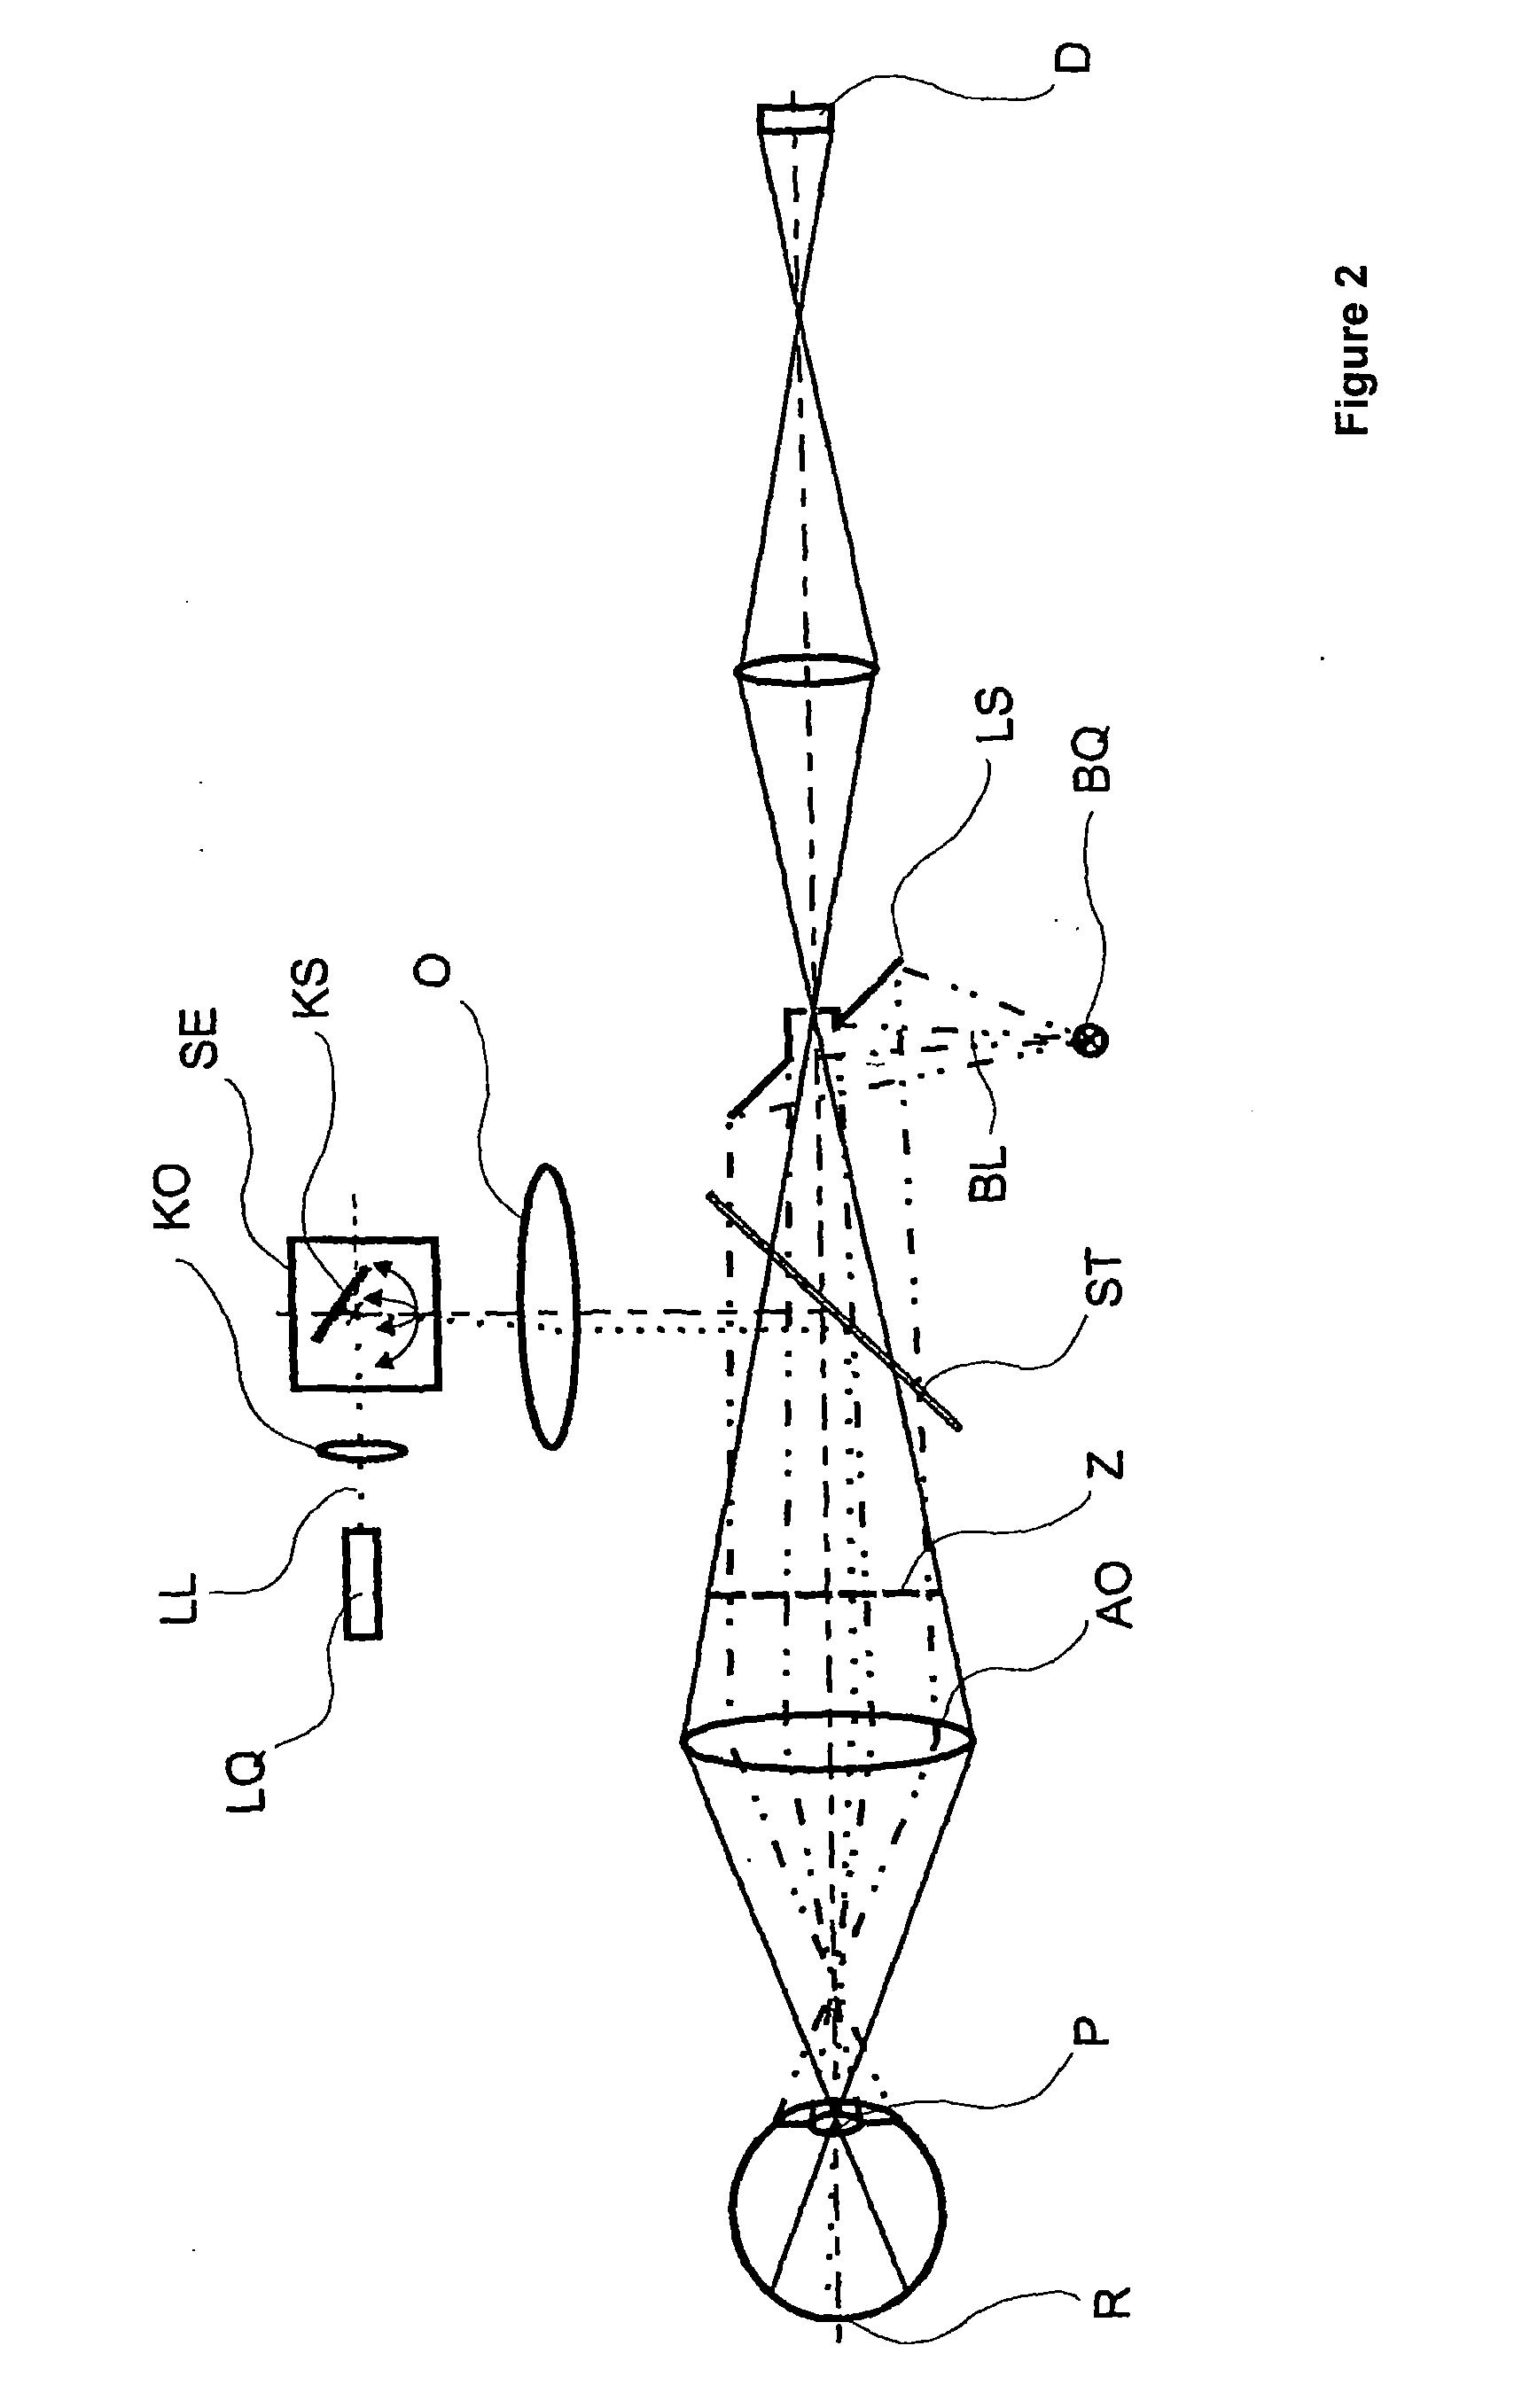 Ophthalmologic apparatus and method for the observation, examination, diagnosis, and/or treatment of an eye